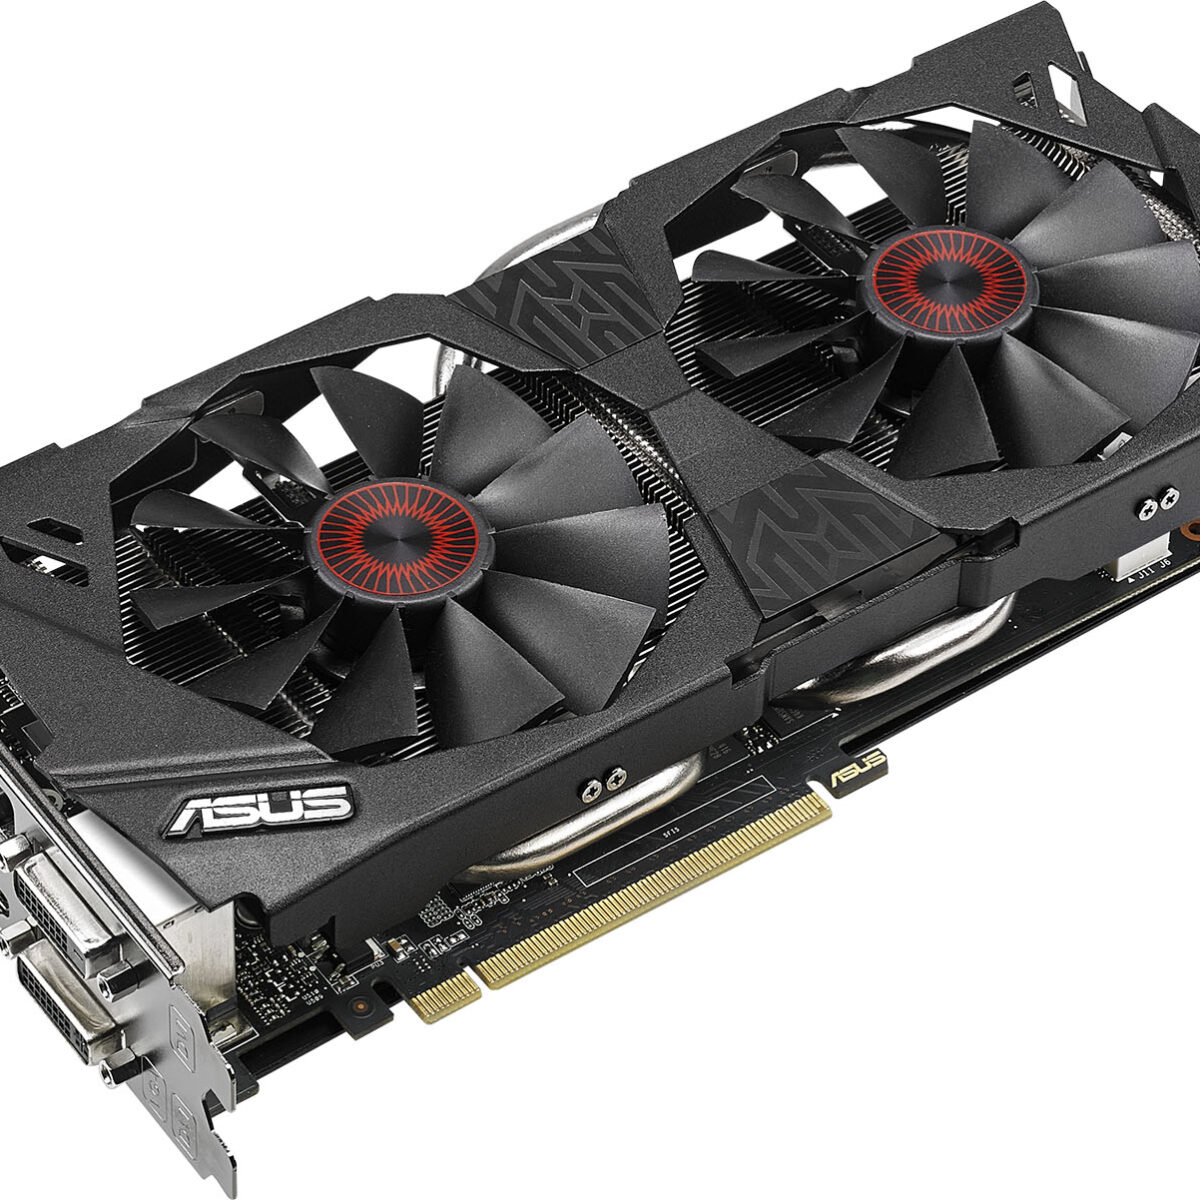 ASUS Strix Edition GeForce GTX Graphics Card Review – Techgage